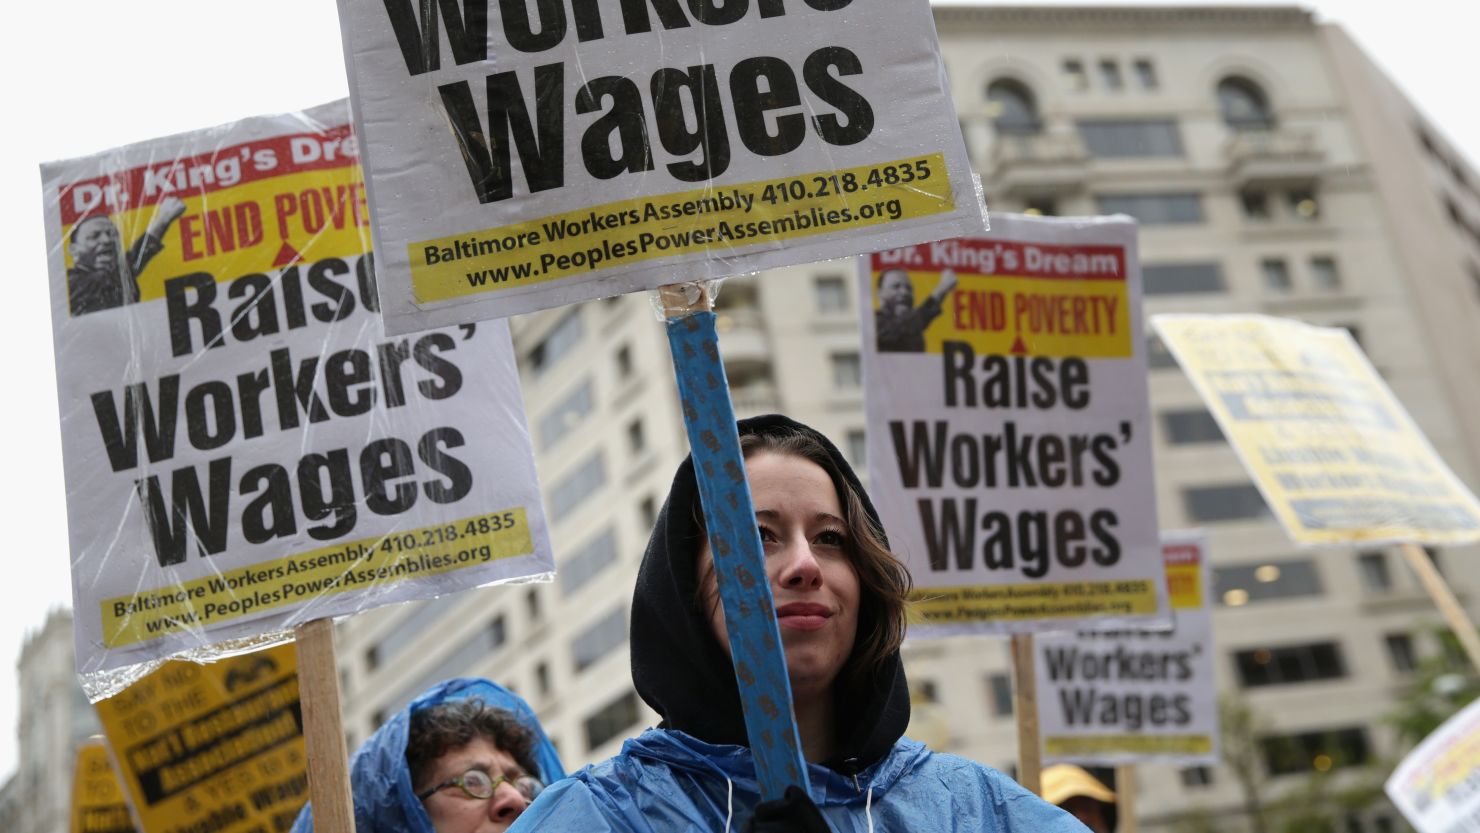 Workers demonstrate for a higher minimum wage on April 29 in Washington.